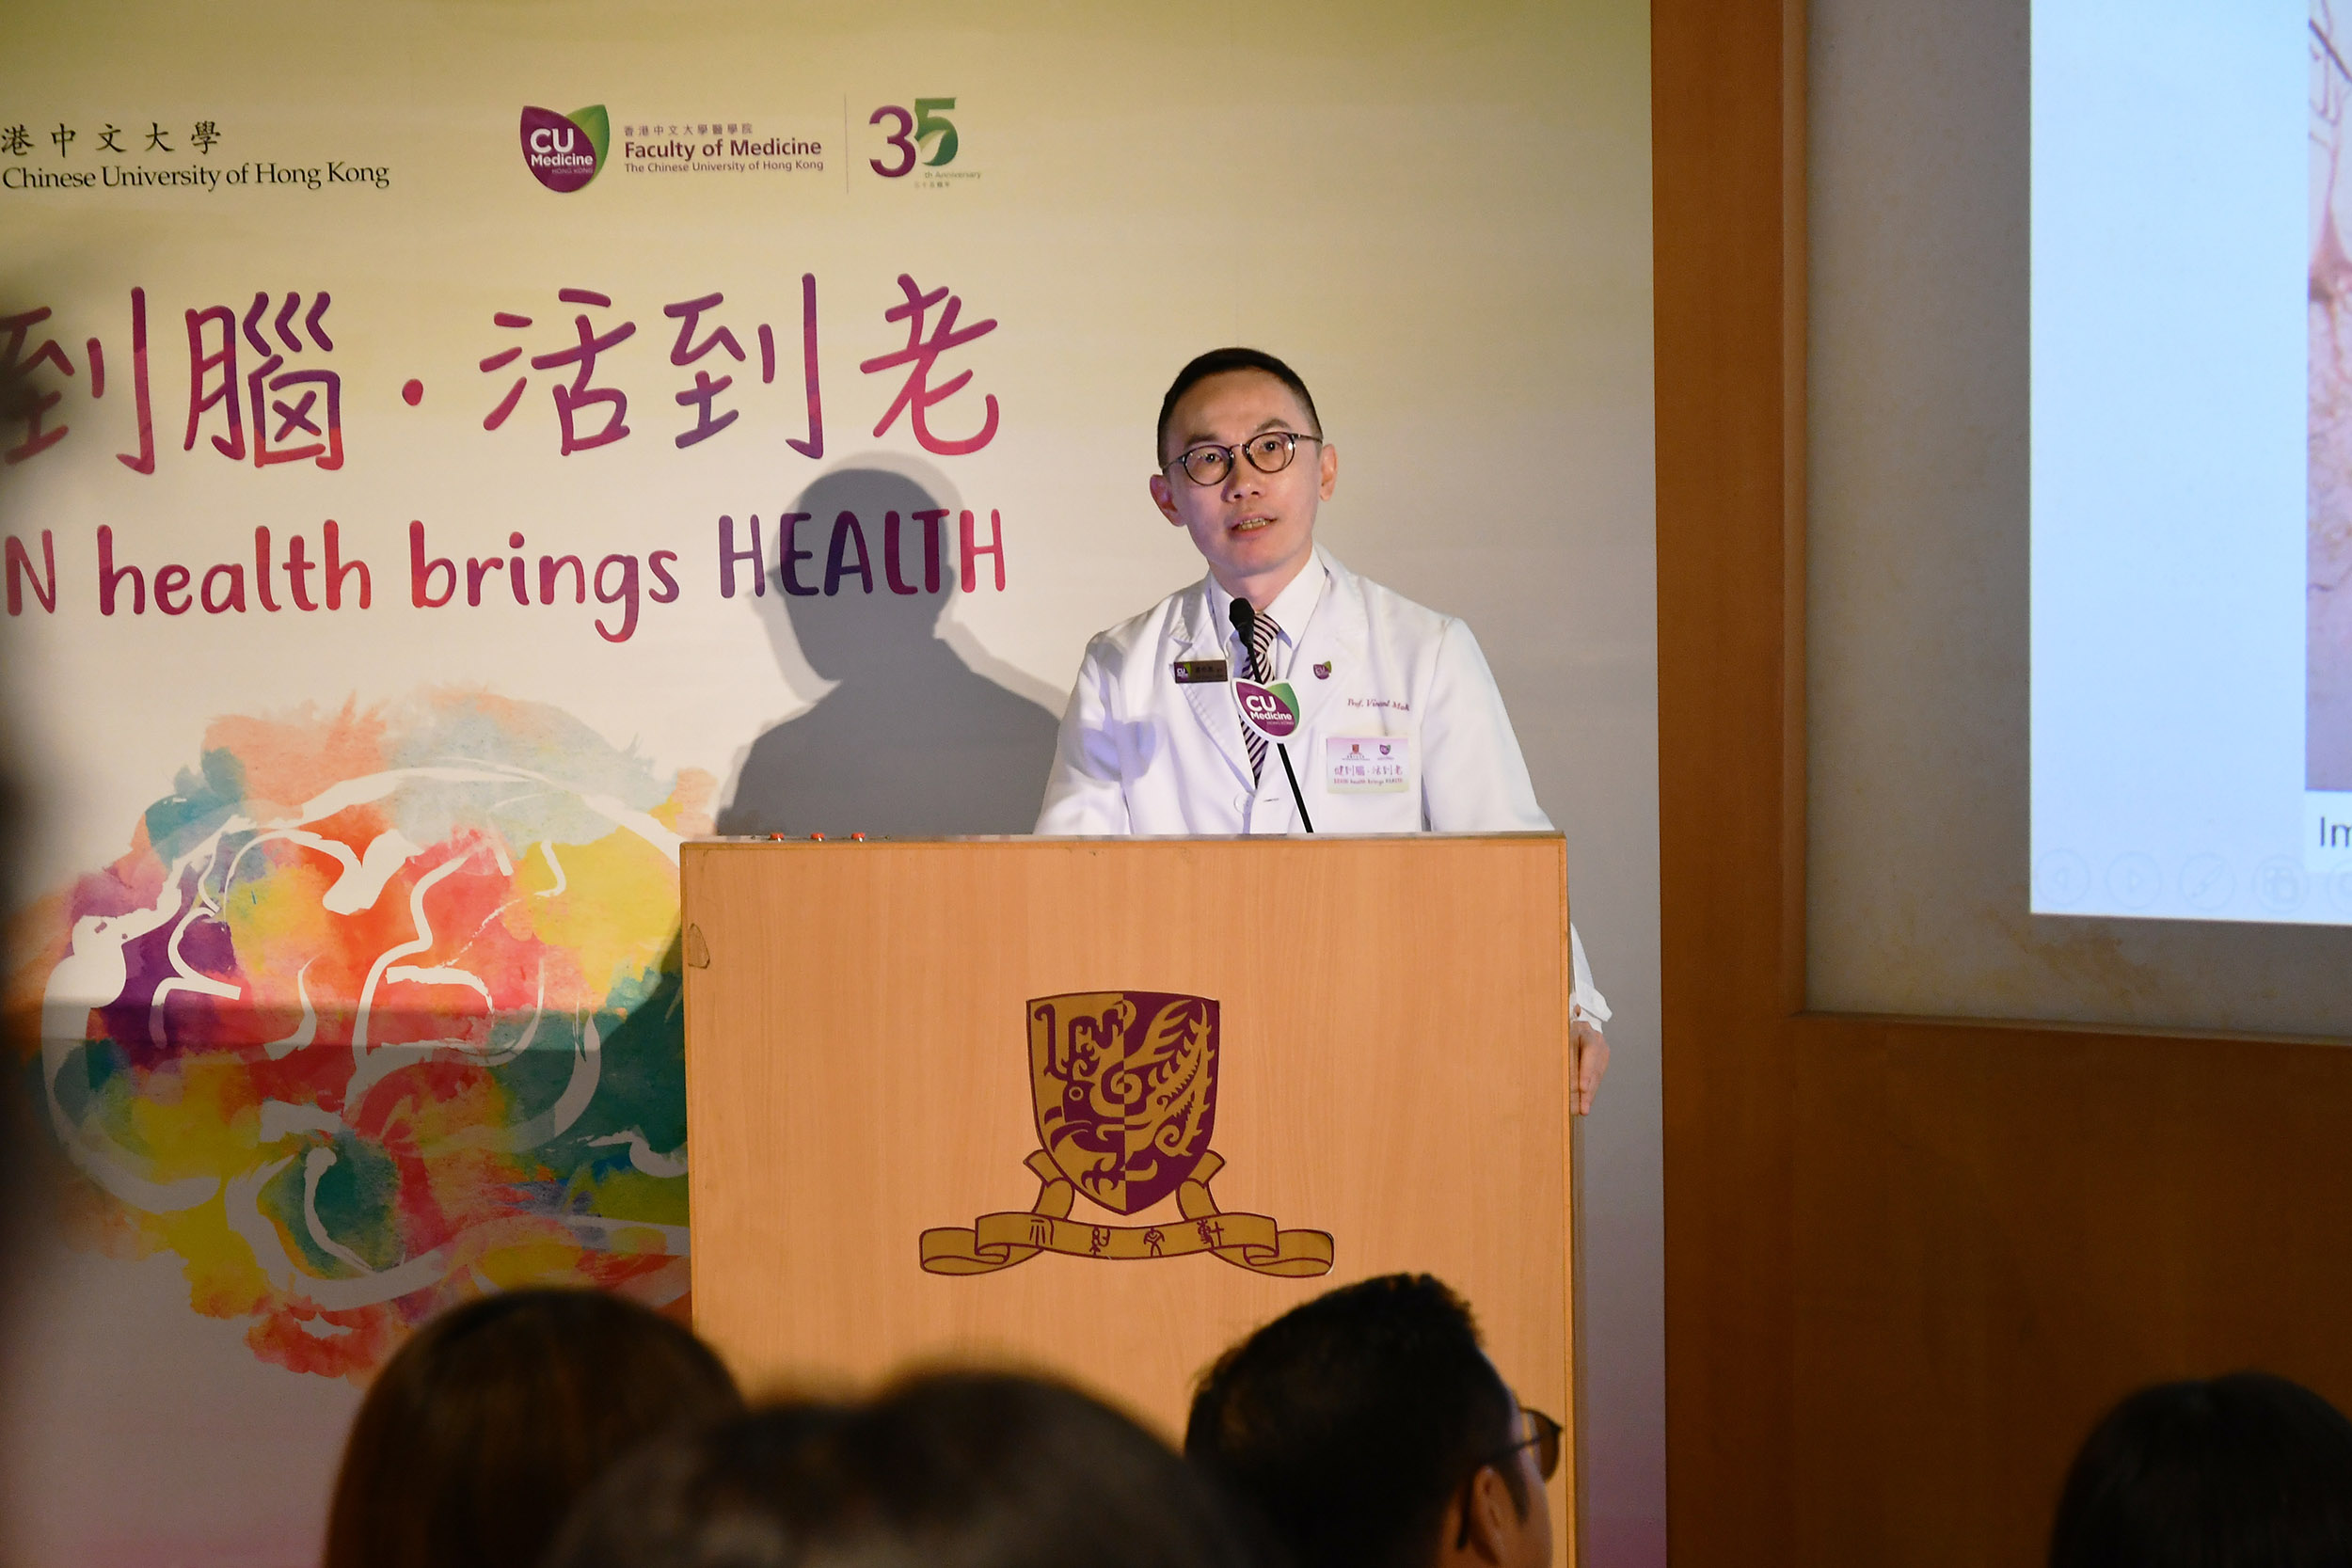 Professor Vincent Chung Tong MOK, Head of Division of Neurology, Department of Medicine and Therapeutics, CUHK wishes the slogan 'Brain Health Brings Health' can raise public awareness of brain health.